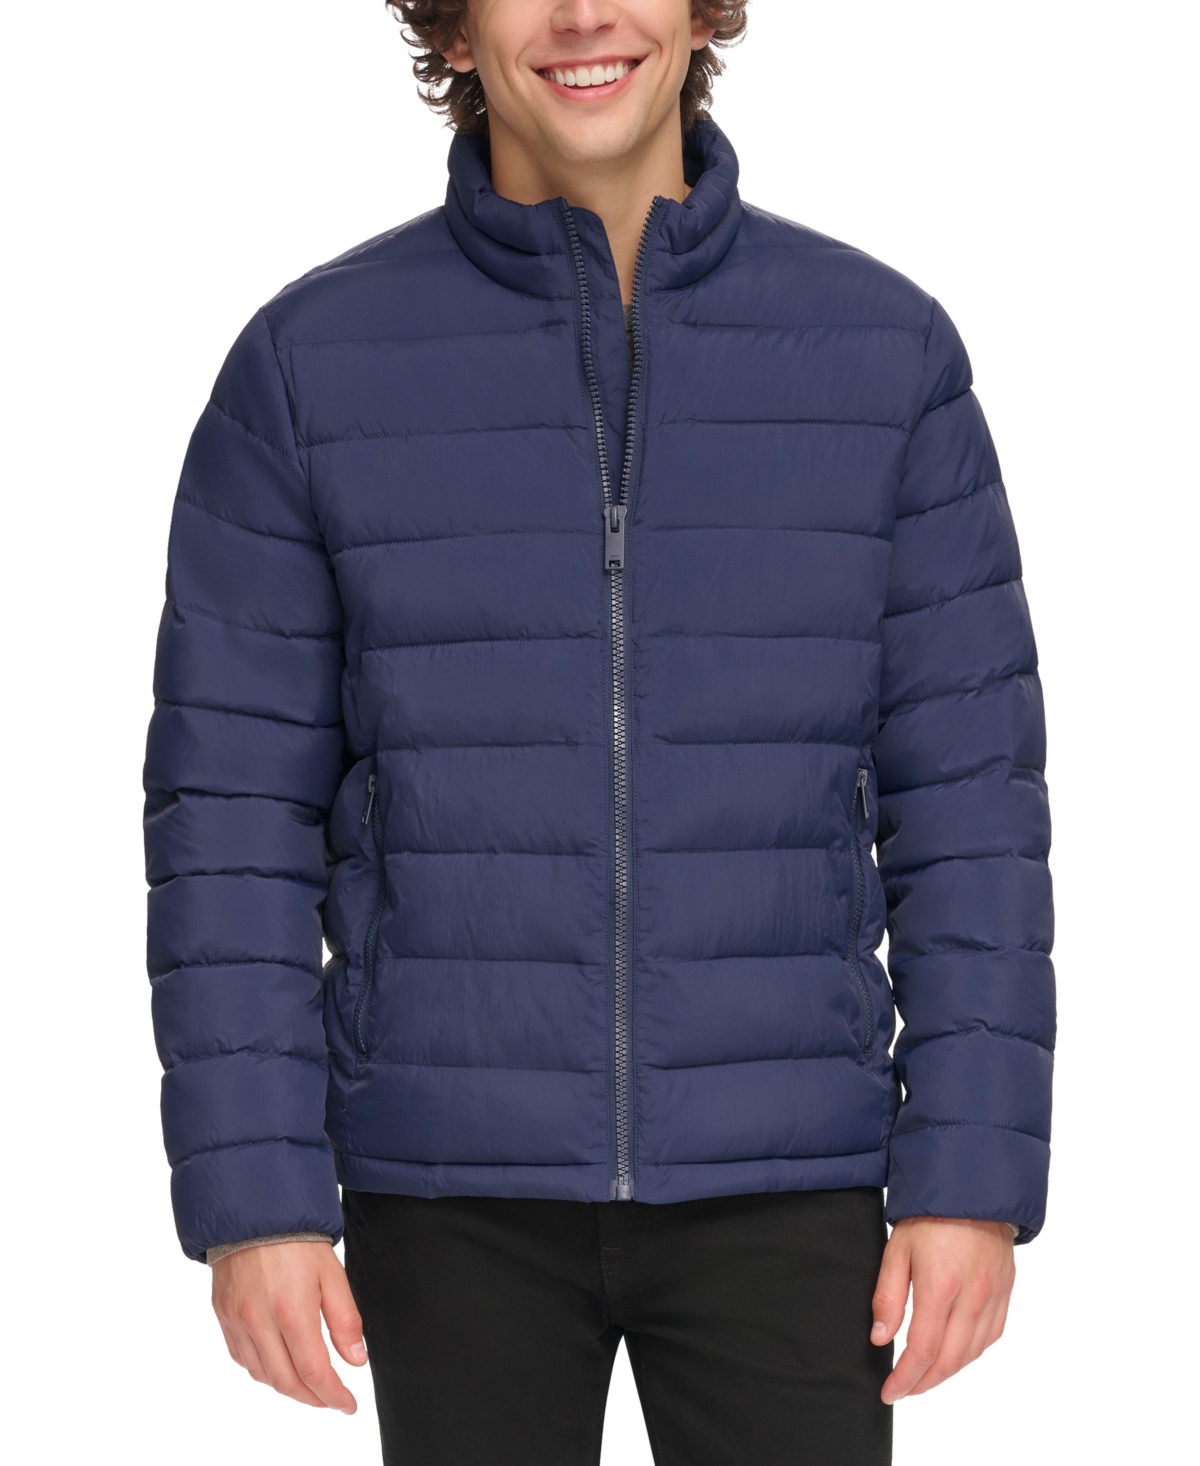 Dkny Men's Quilted Full-zip Stand Collar Puffer Jacket In Navy